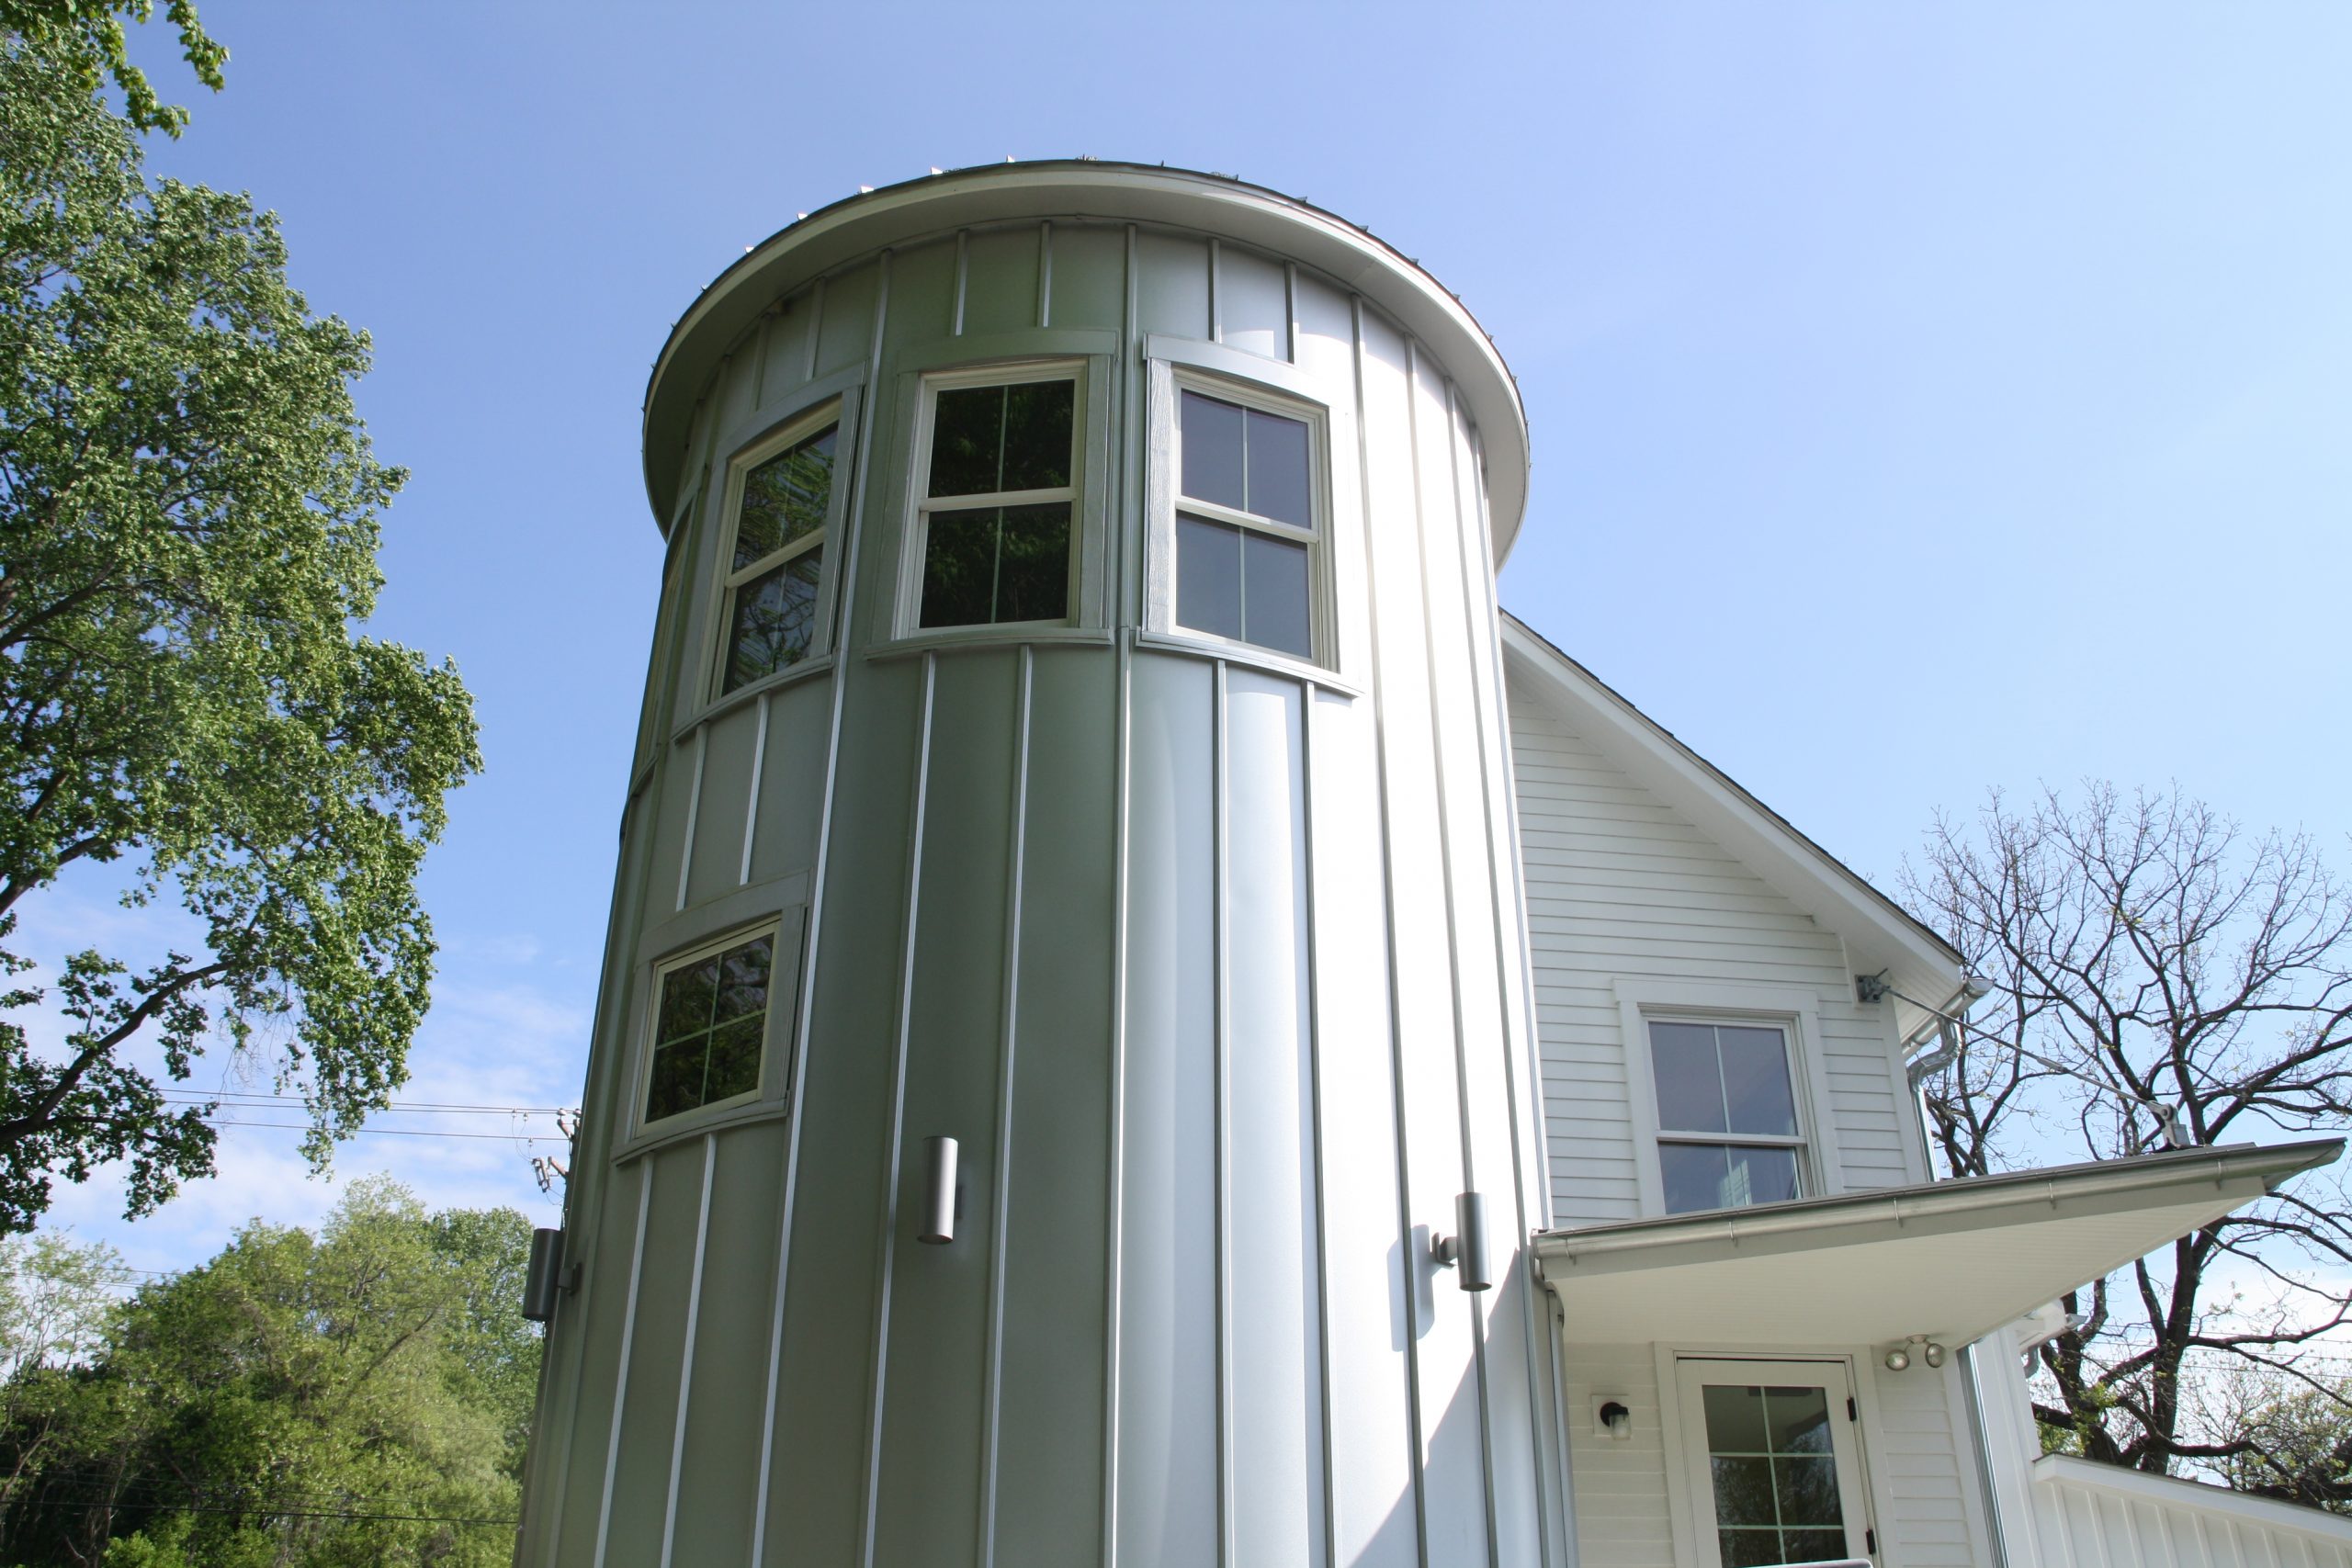 A silo-shaped part of the Chadds Ford Winery exterior